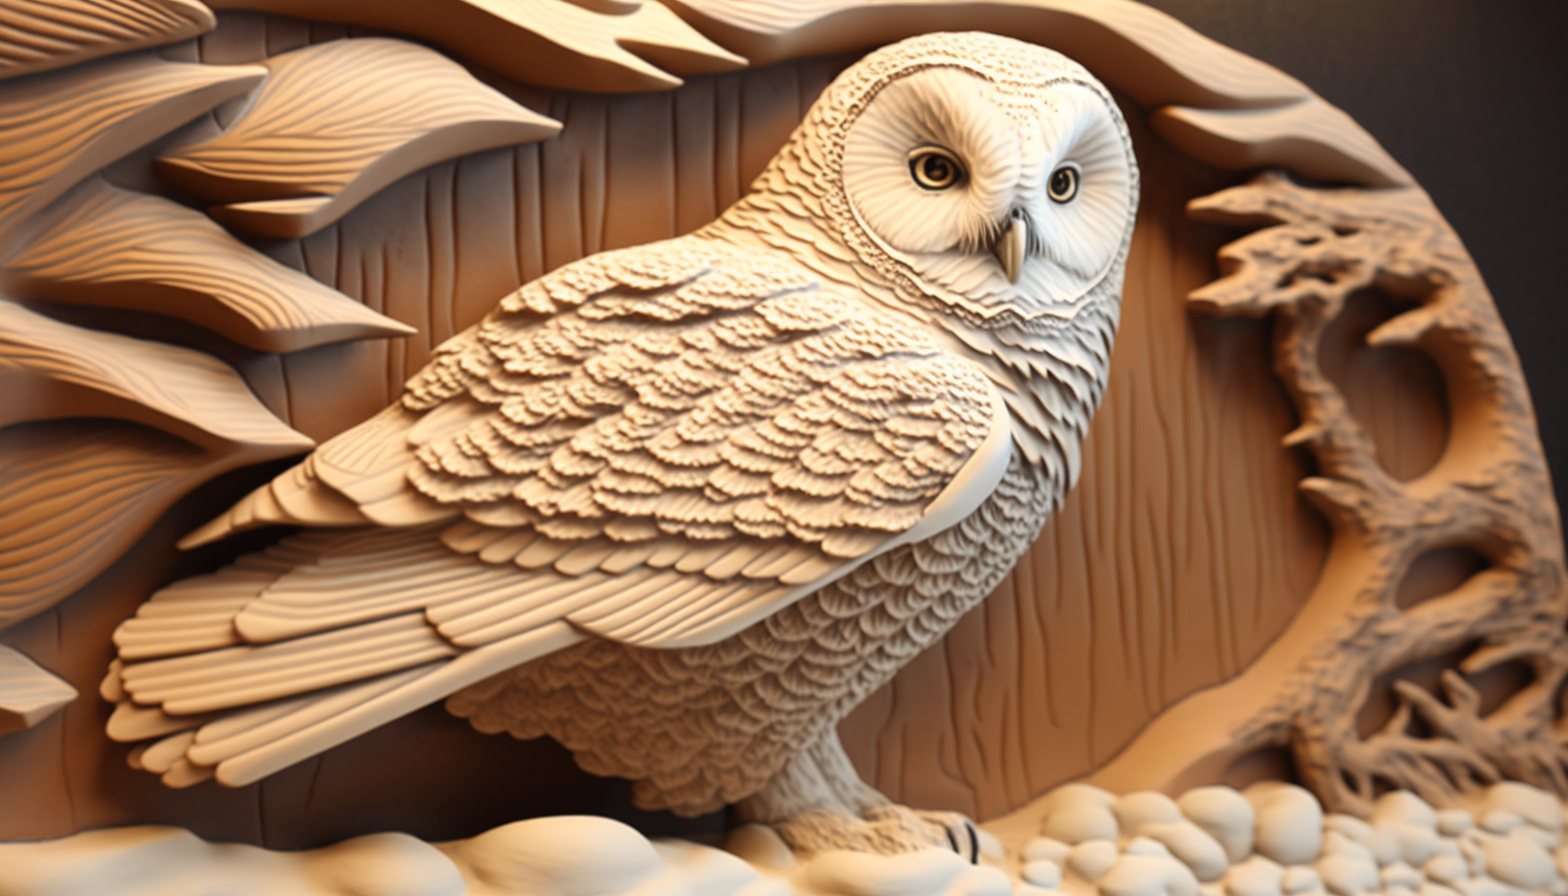 Making a wood carving of an owl in MidJourney - Prompt Hero.Ai